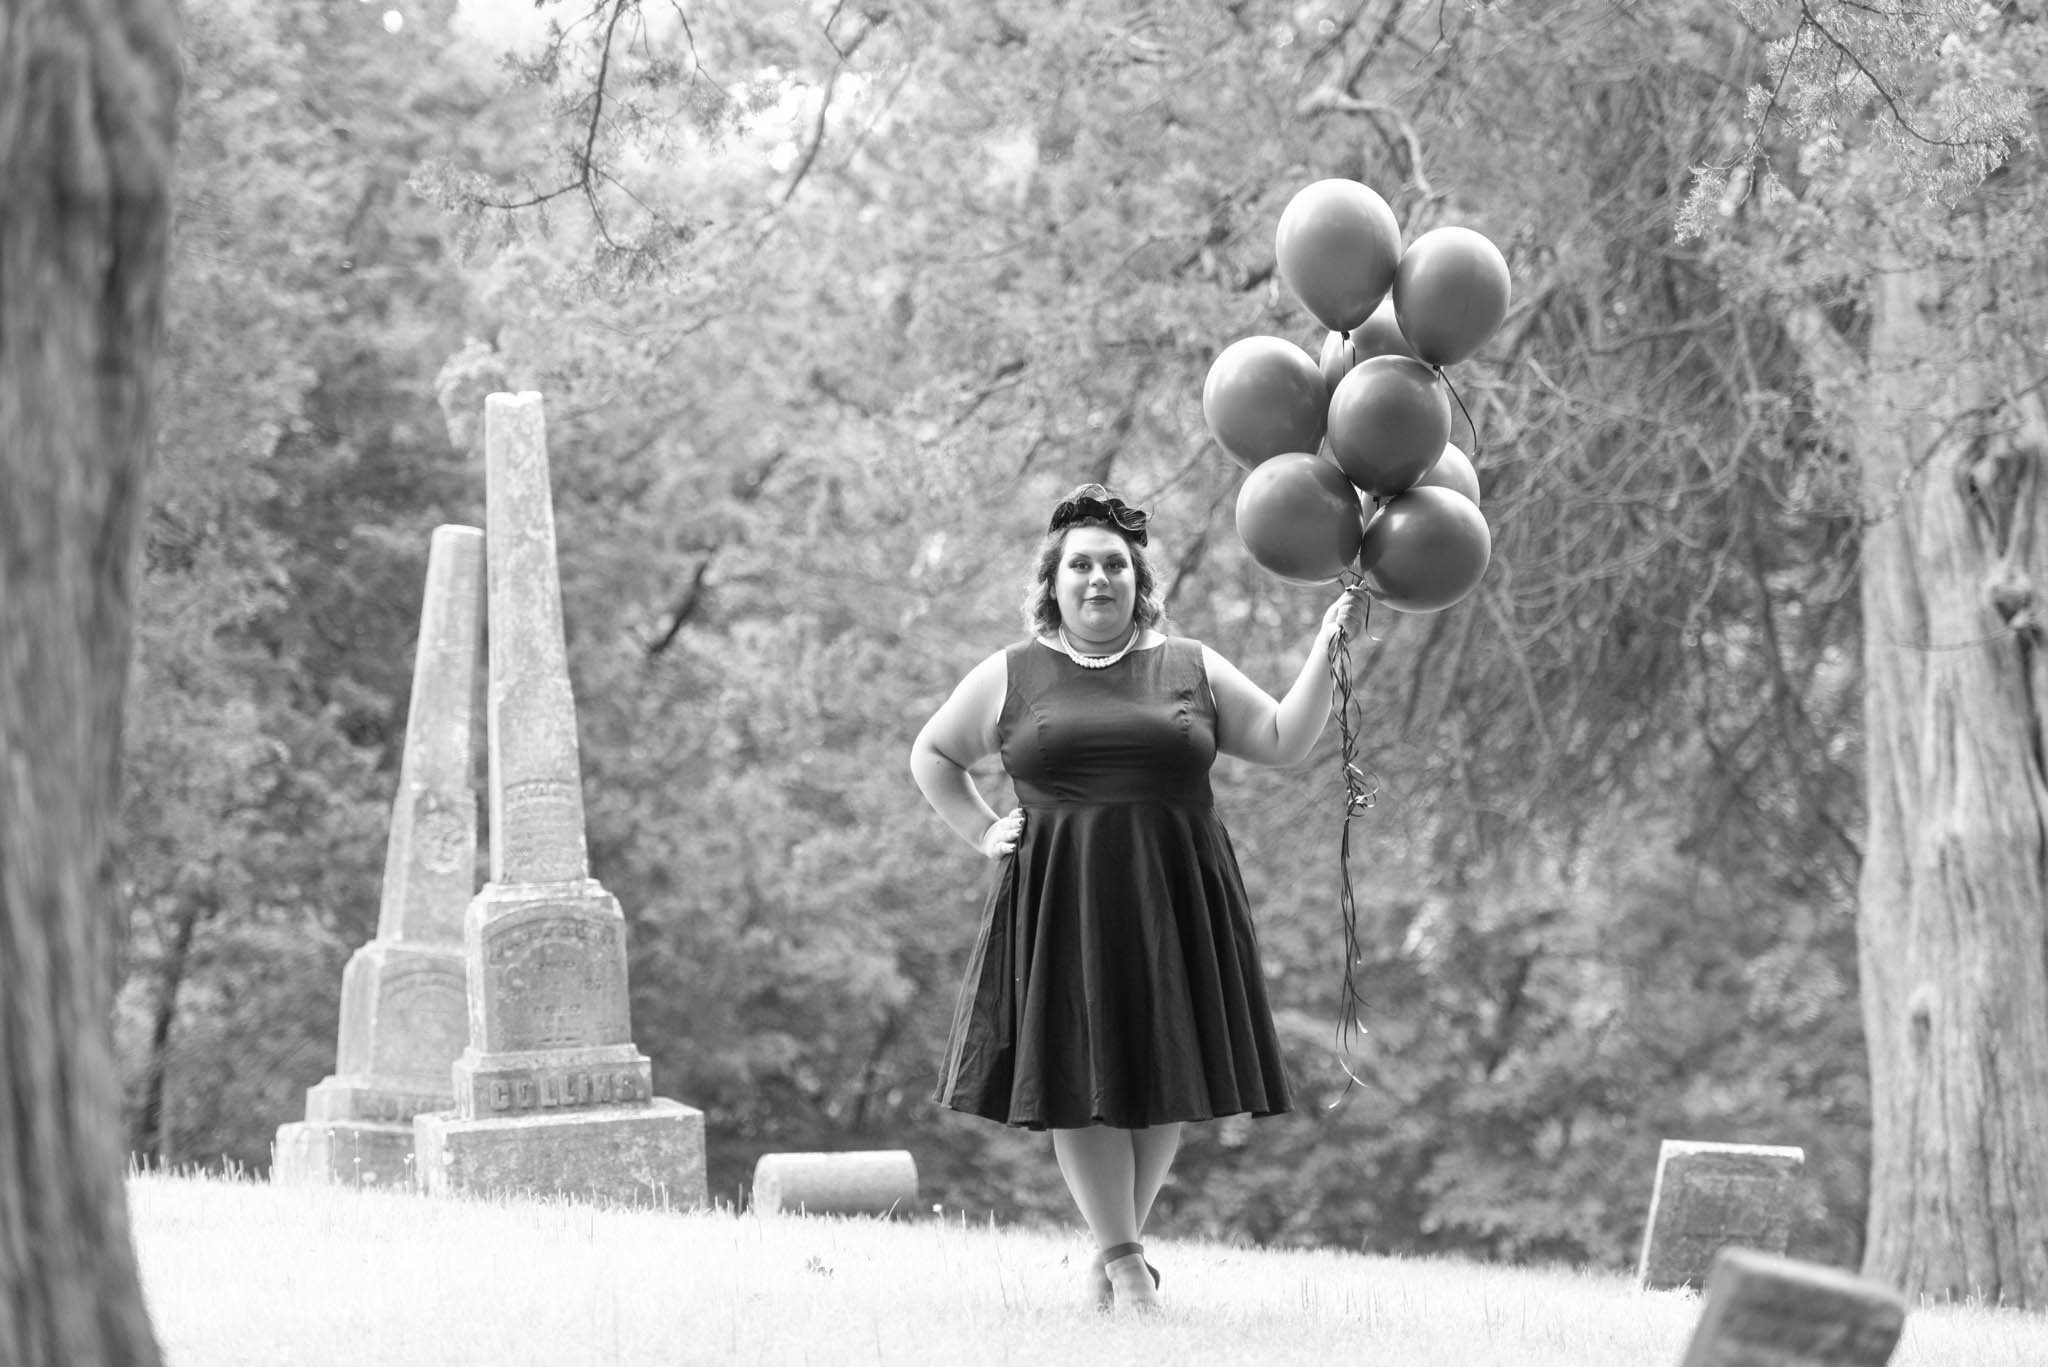  Samantha in black dress and vintage black hat poses in cemetery with black balloons. Photo is displayed in black and white. 